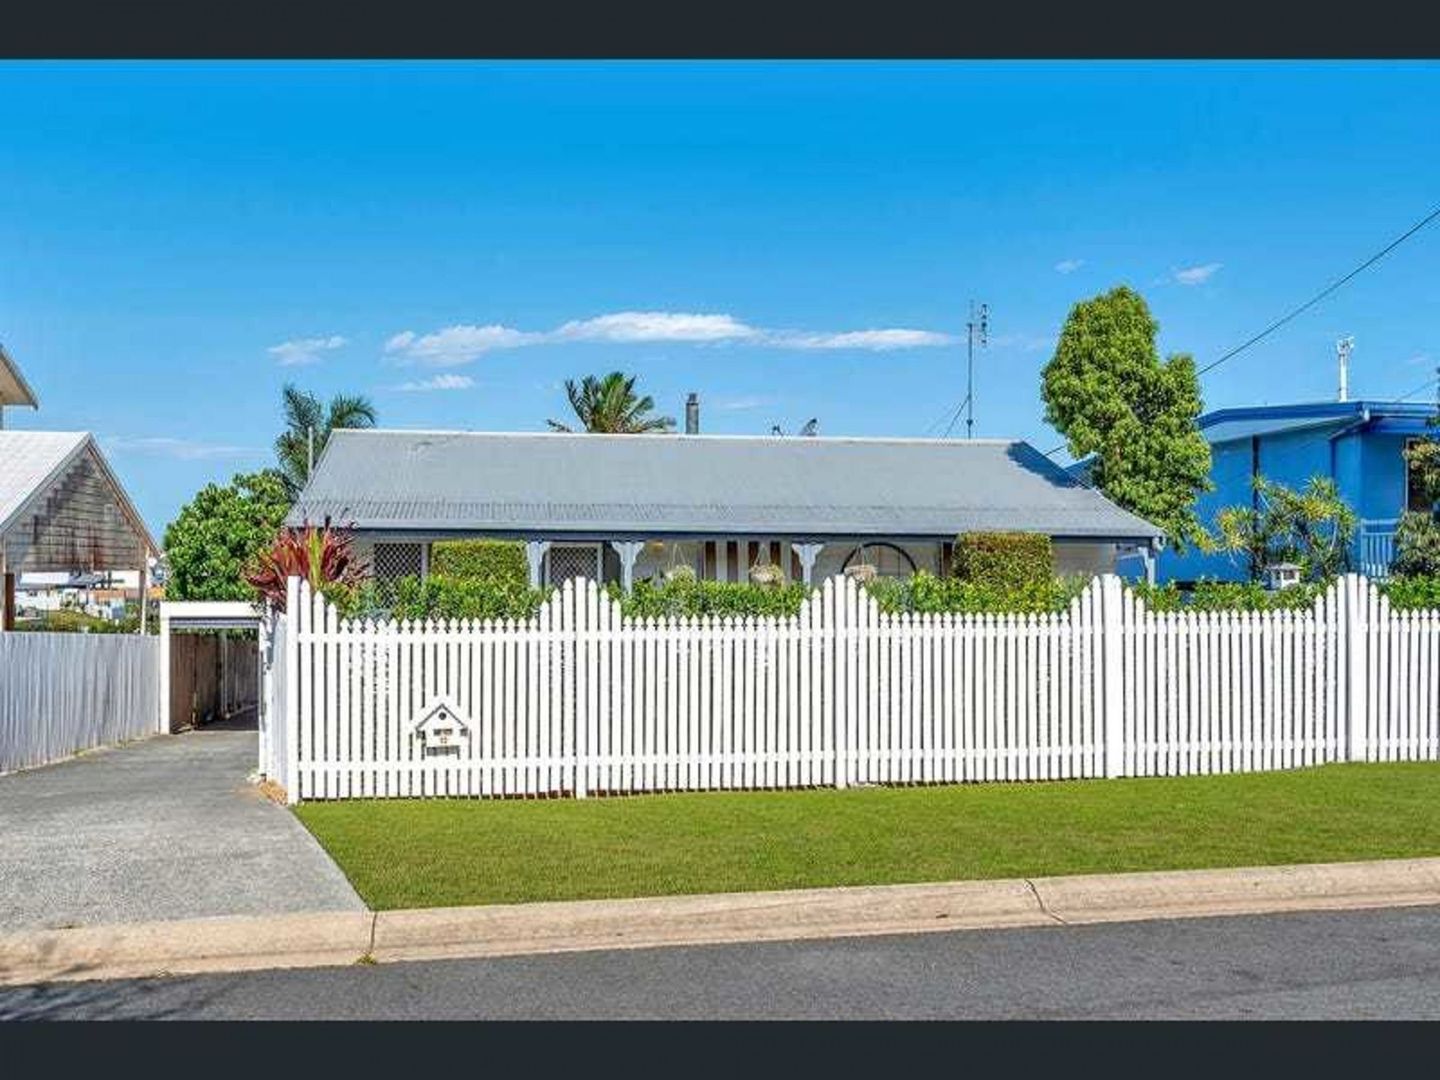 12 Aaron Street, Coomera, Property History & Address Research